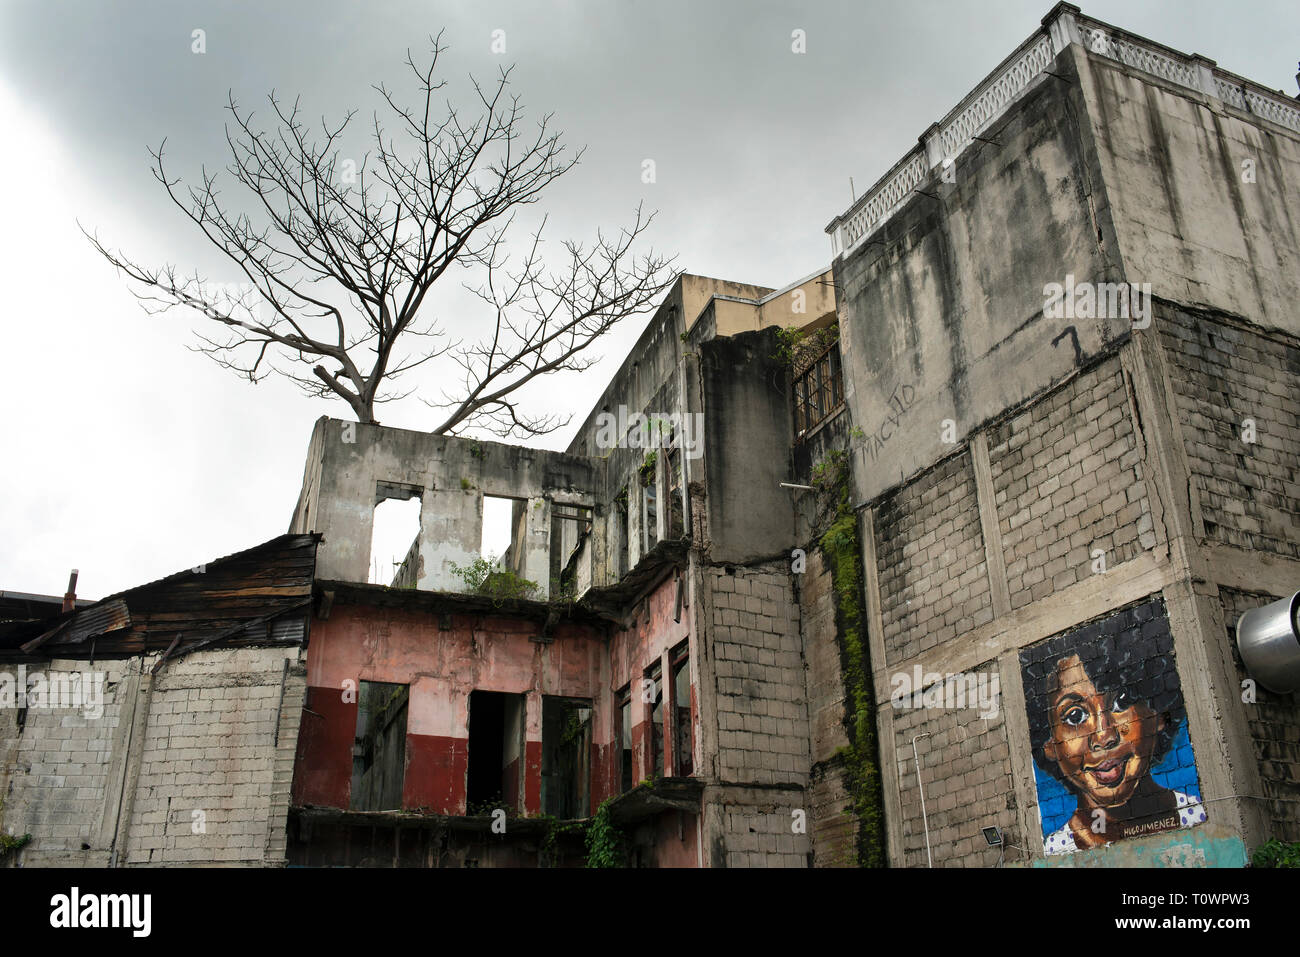 Abandoned residential building with a tree growing inside. Derelict street scene in Casco Viejo (Casco Antiguo). Panama City, Panama. Oct 2018 Stock Photo